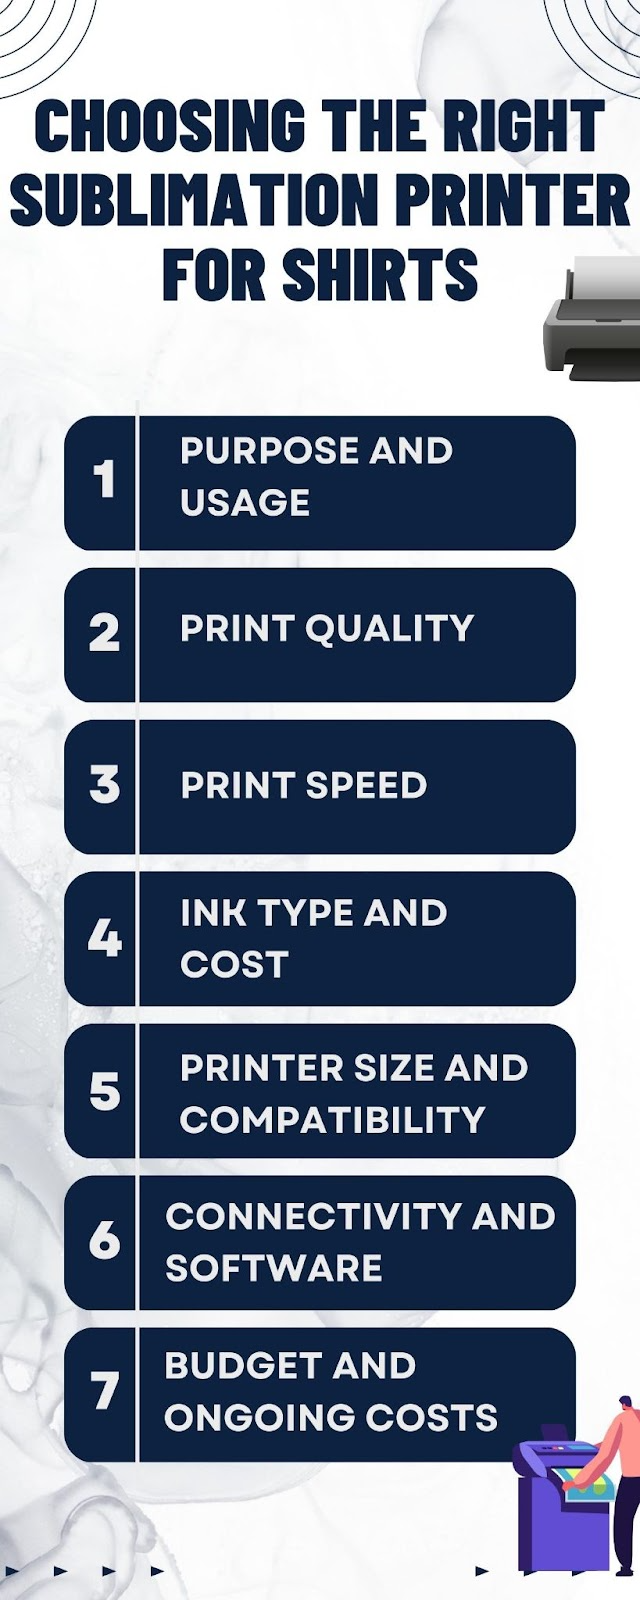 Choosing the Right Sublimation Printer for Shirts